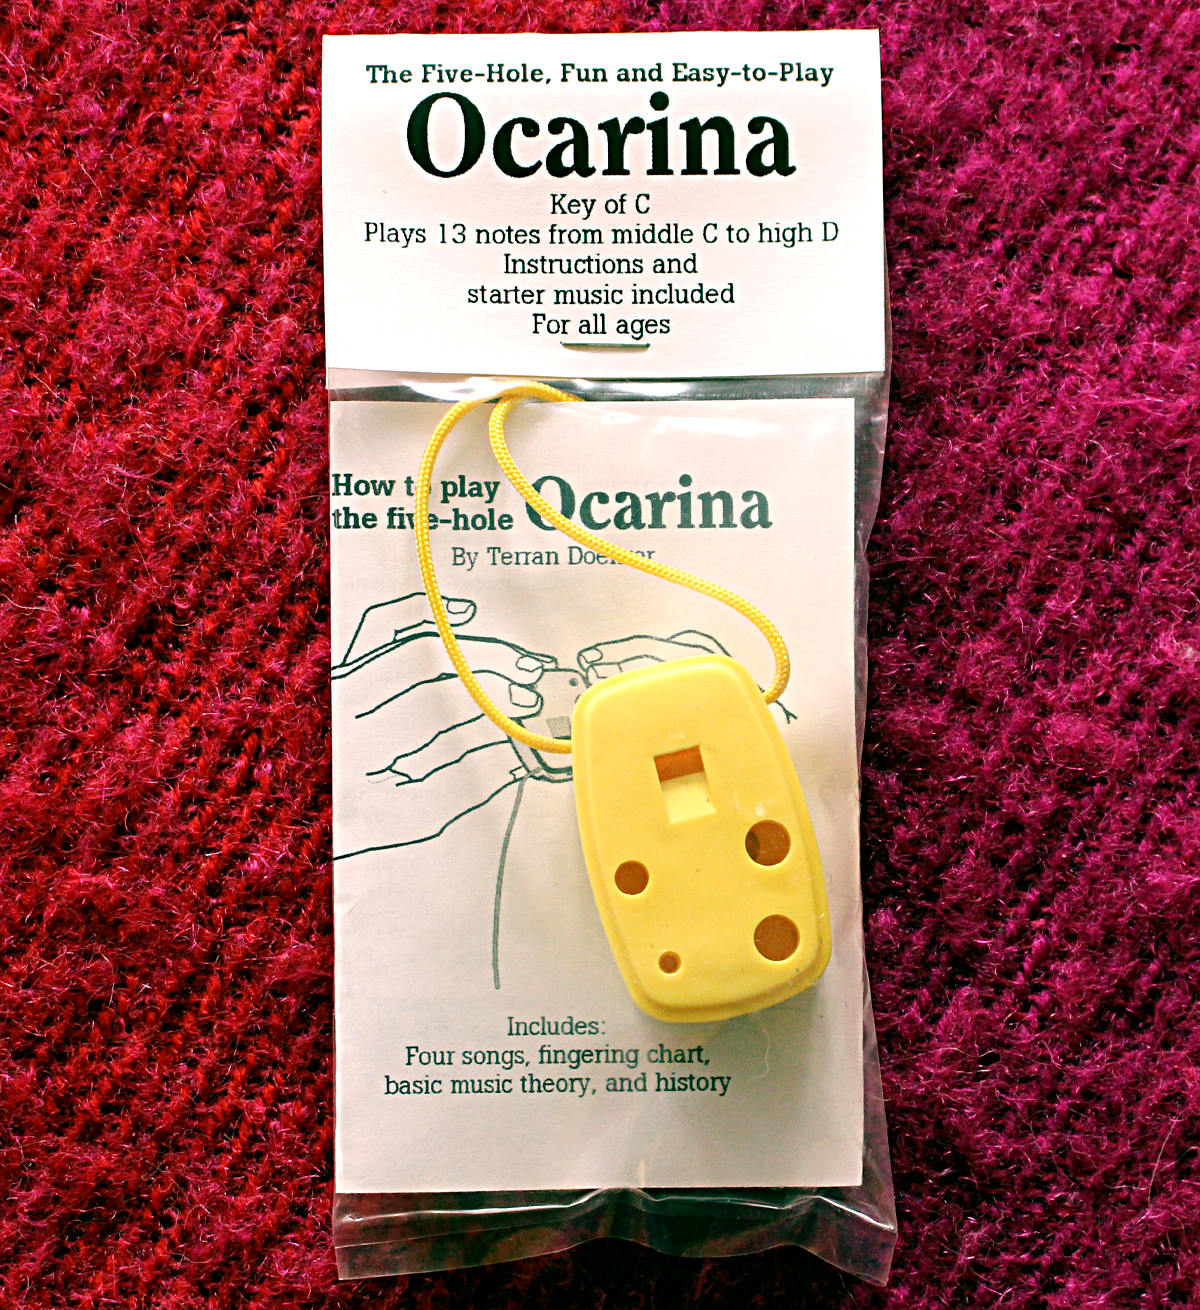 Front side of a yellow ocarina with instruction booklet.